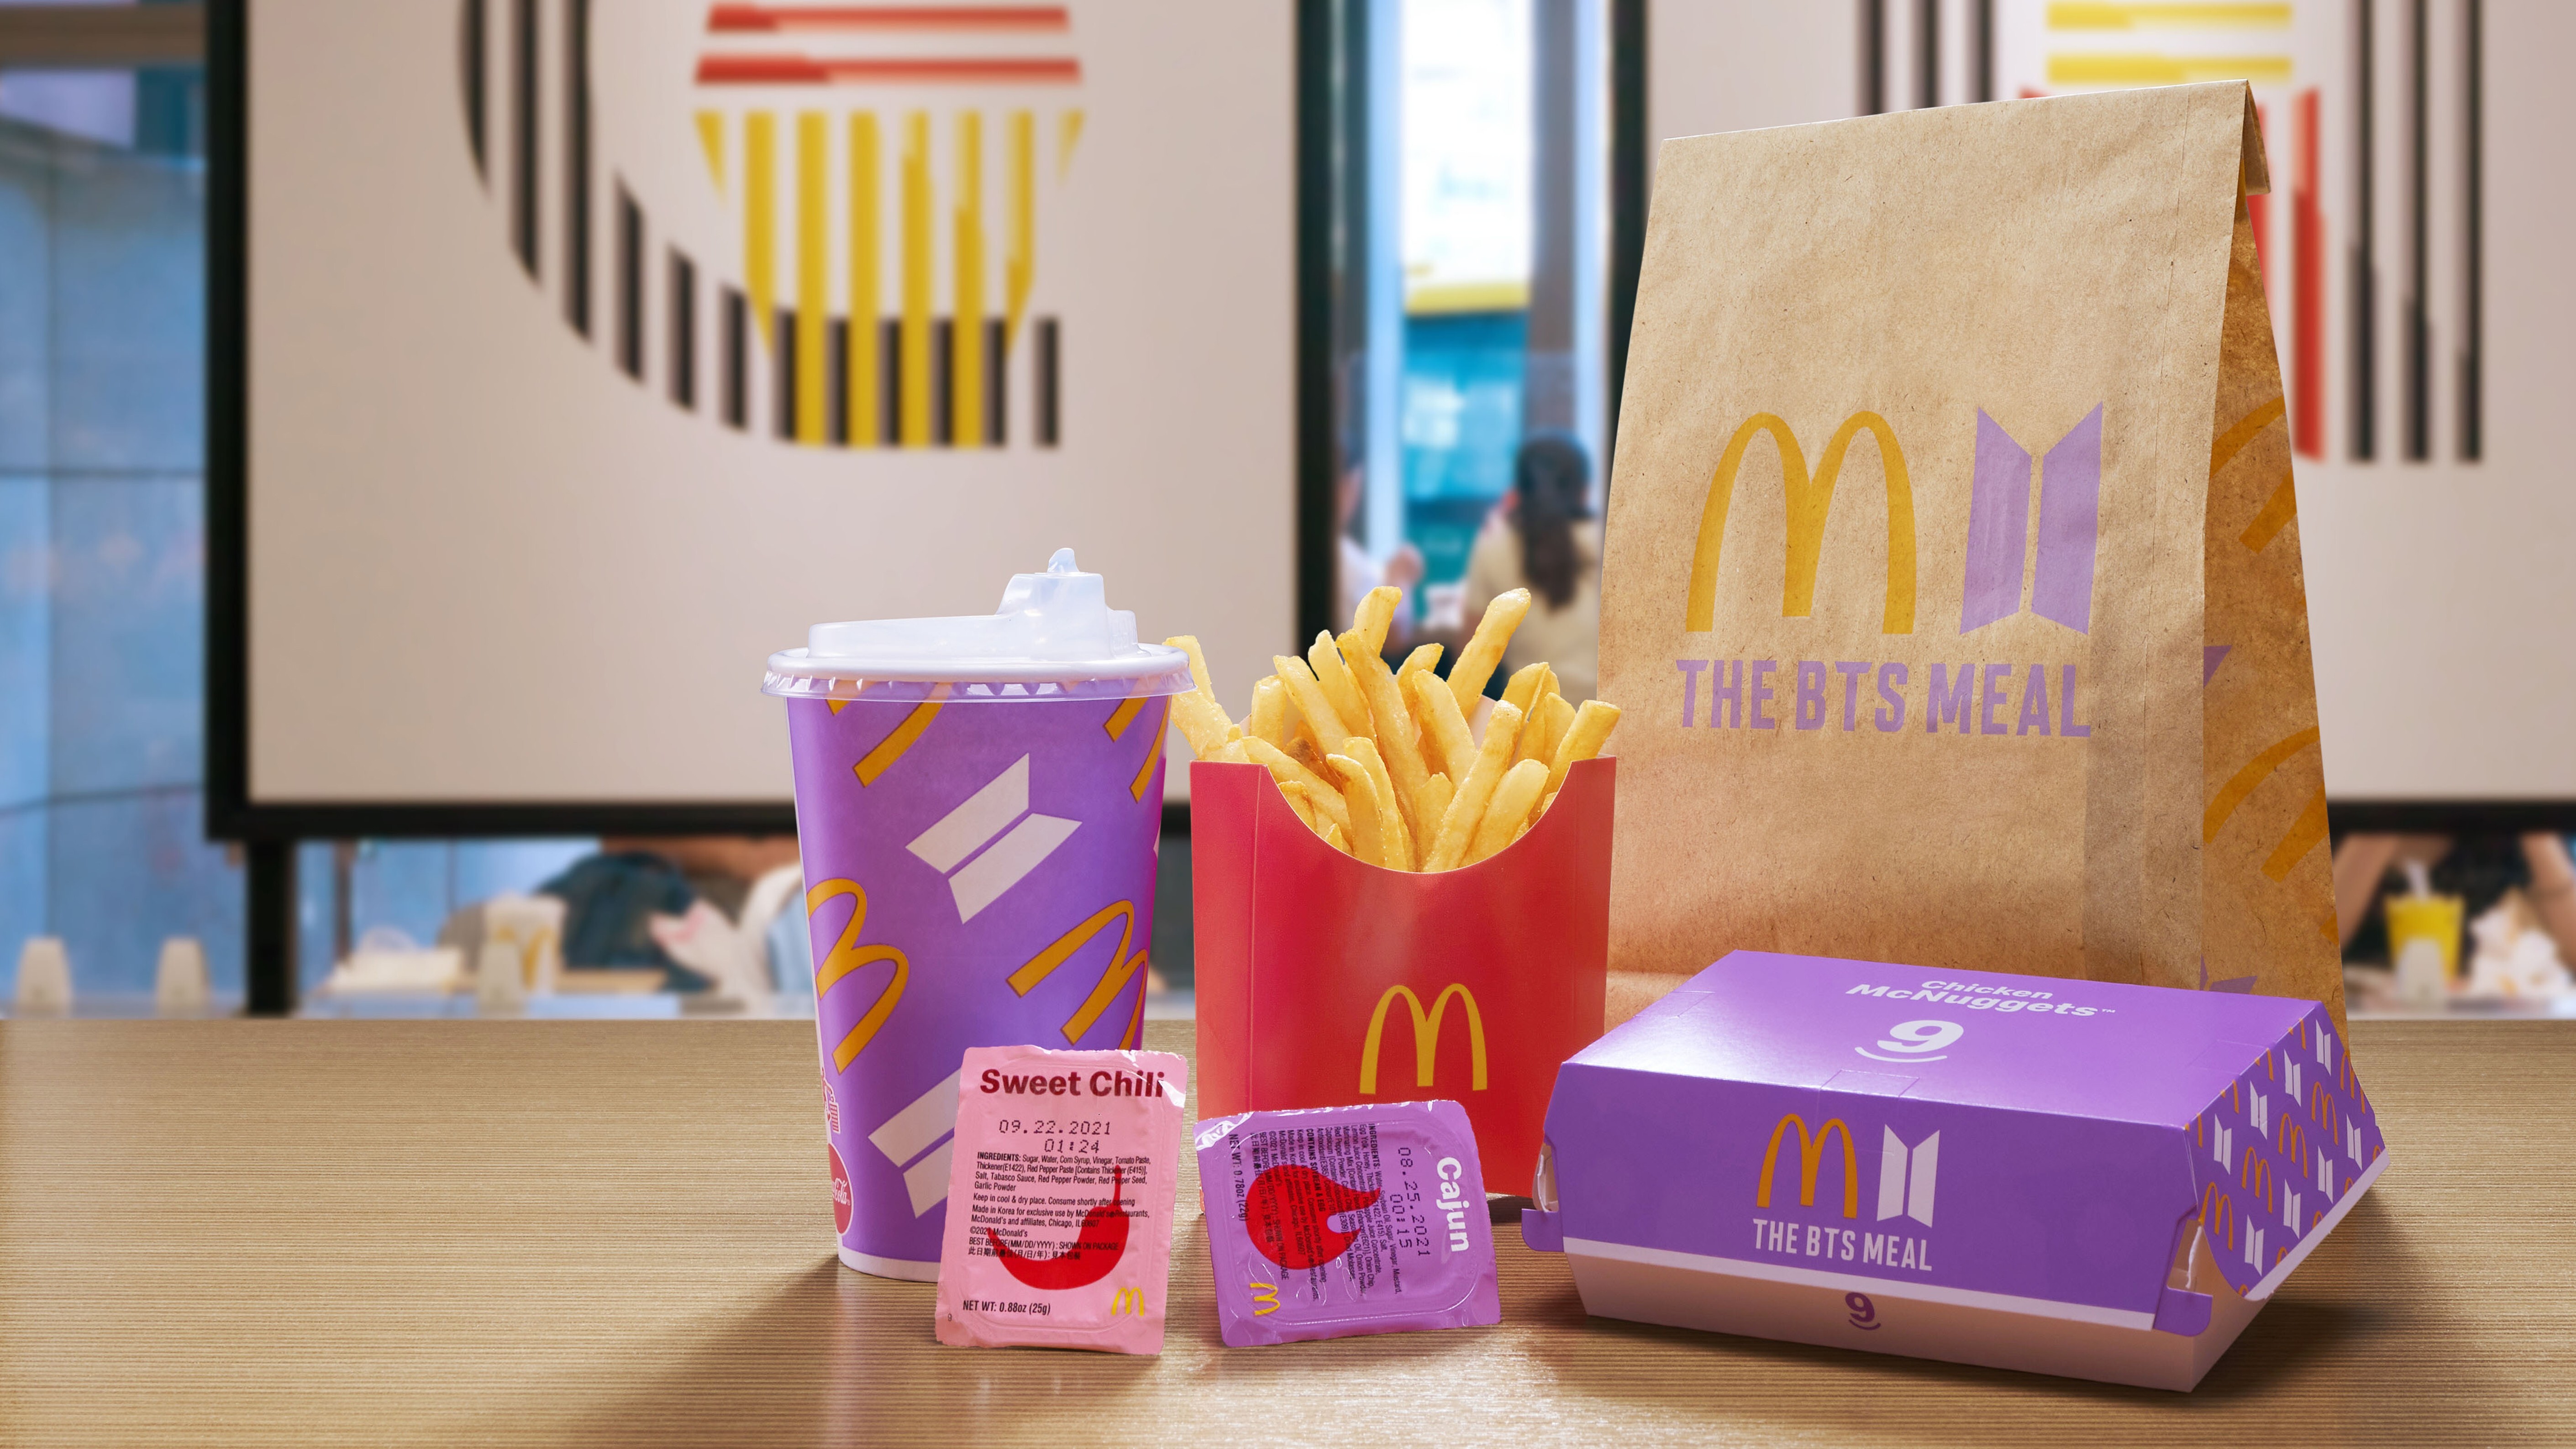 The BTS Meal, a collaboration between McDonald’s and the K-pop superstars, has the approval of the band’s fans in Hong Kong and around the world. Photo: McDonald’s